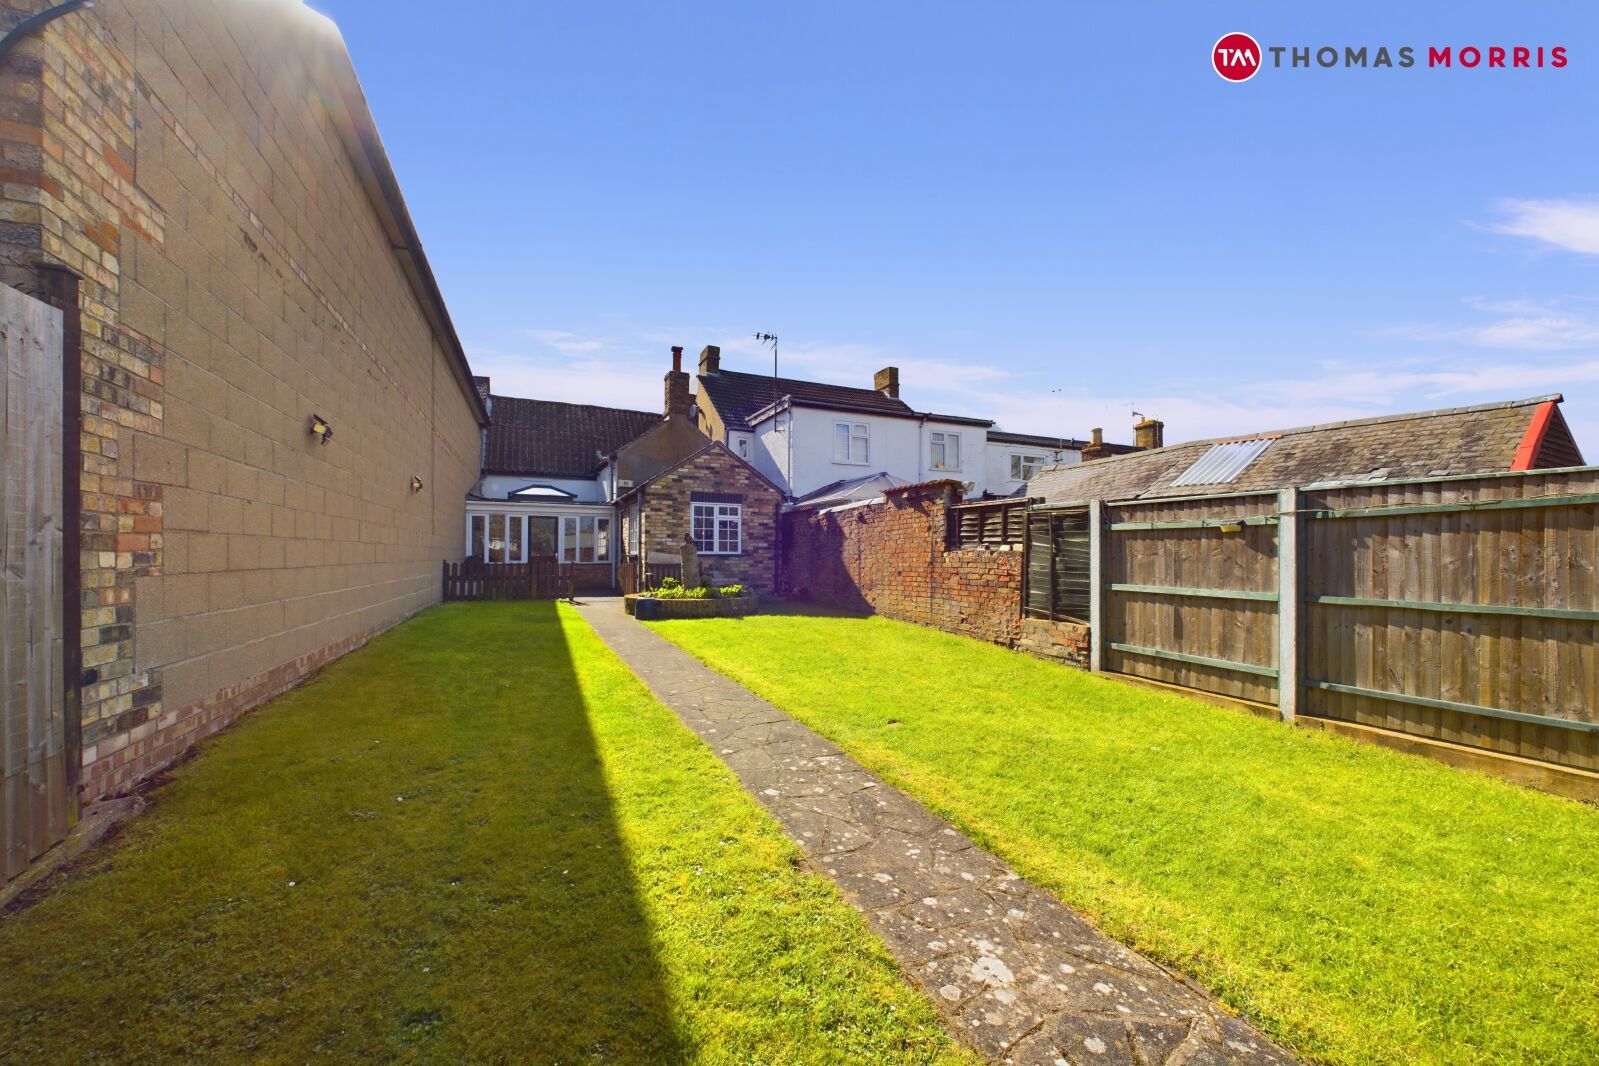 2 bedroom mid terraced house for sale Great Whyte, Ramsey, PE26, main image